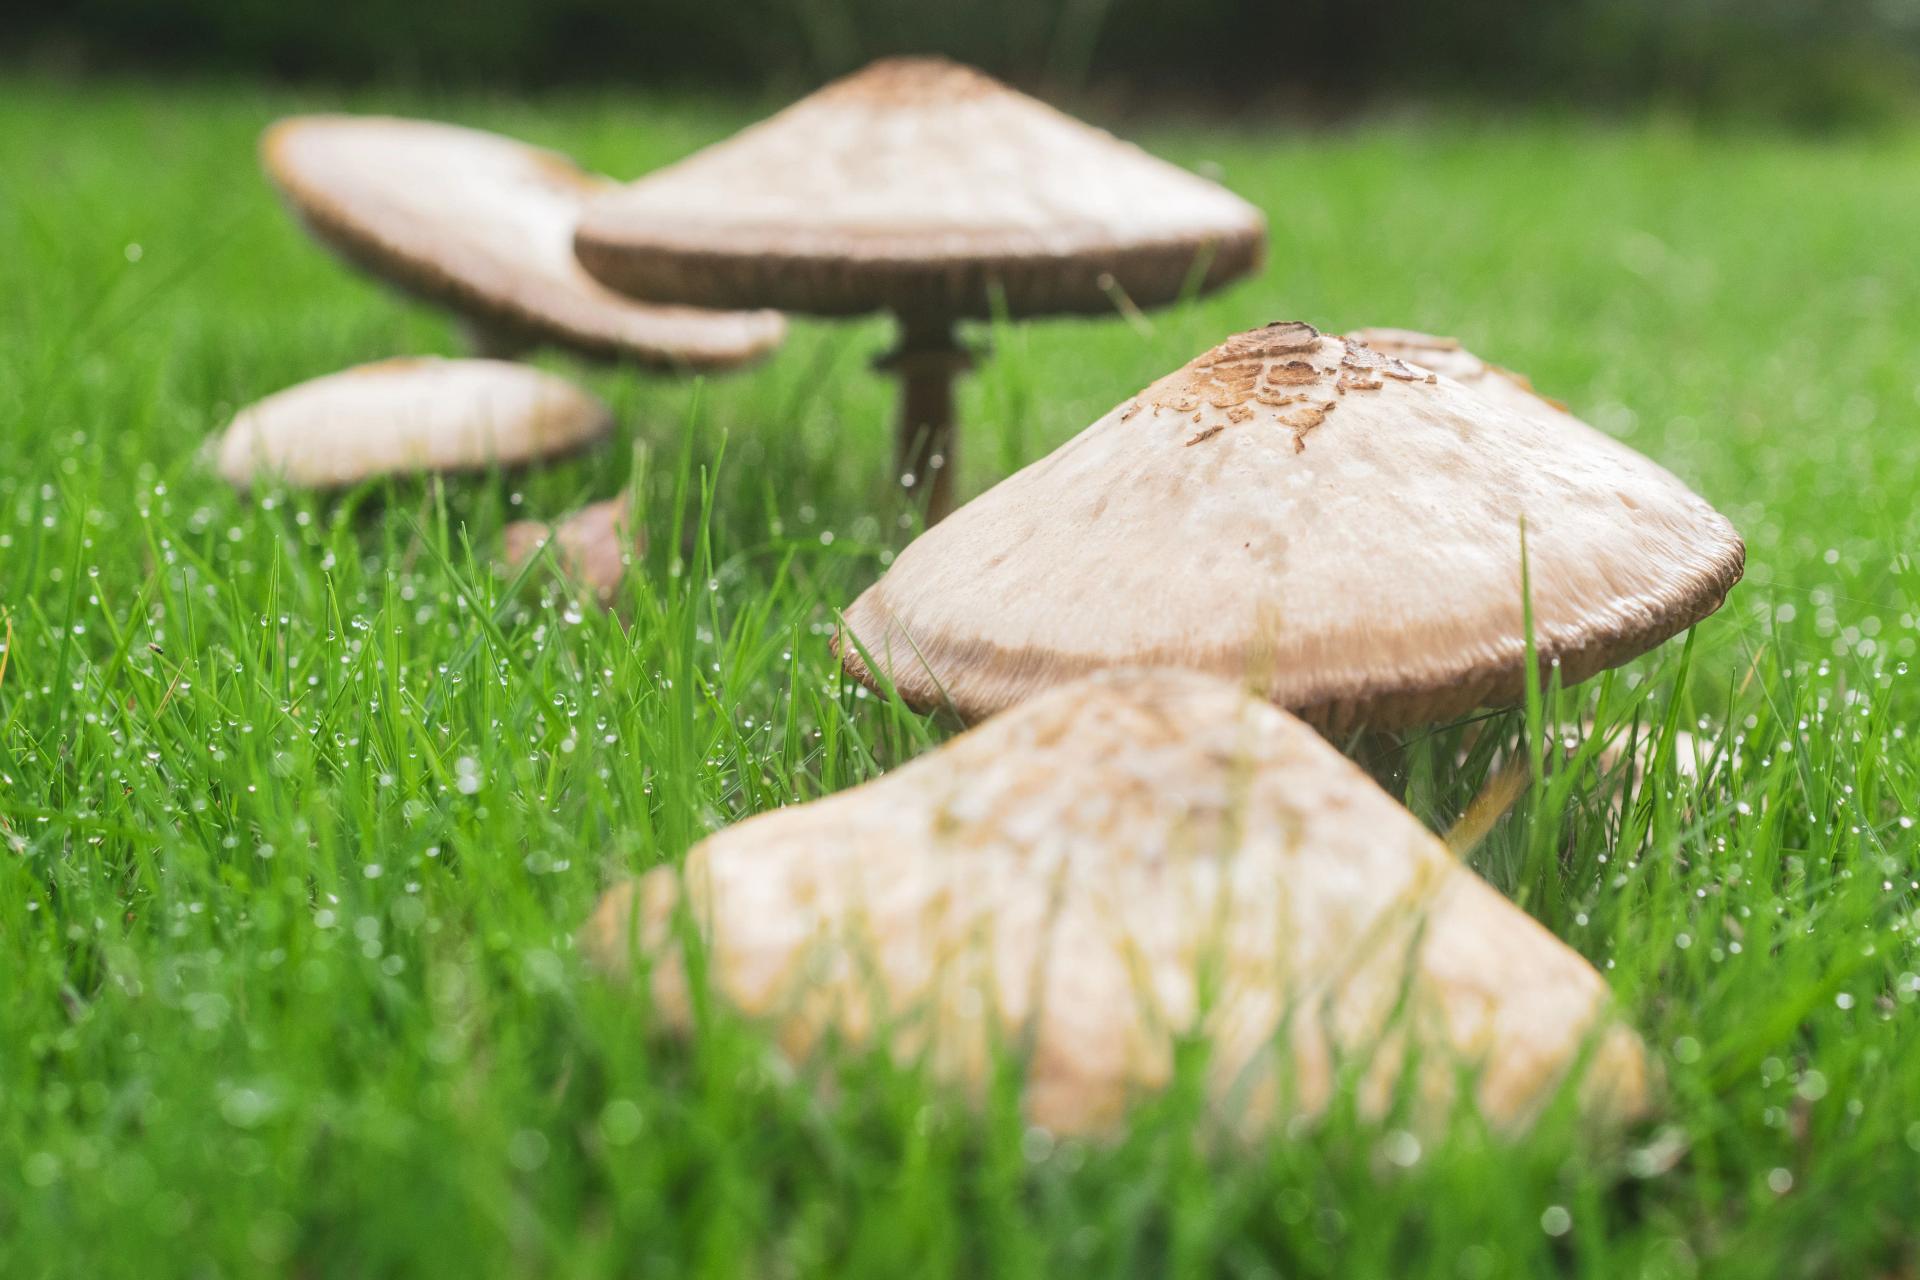 Capped Mushrooms in Grass